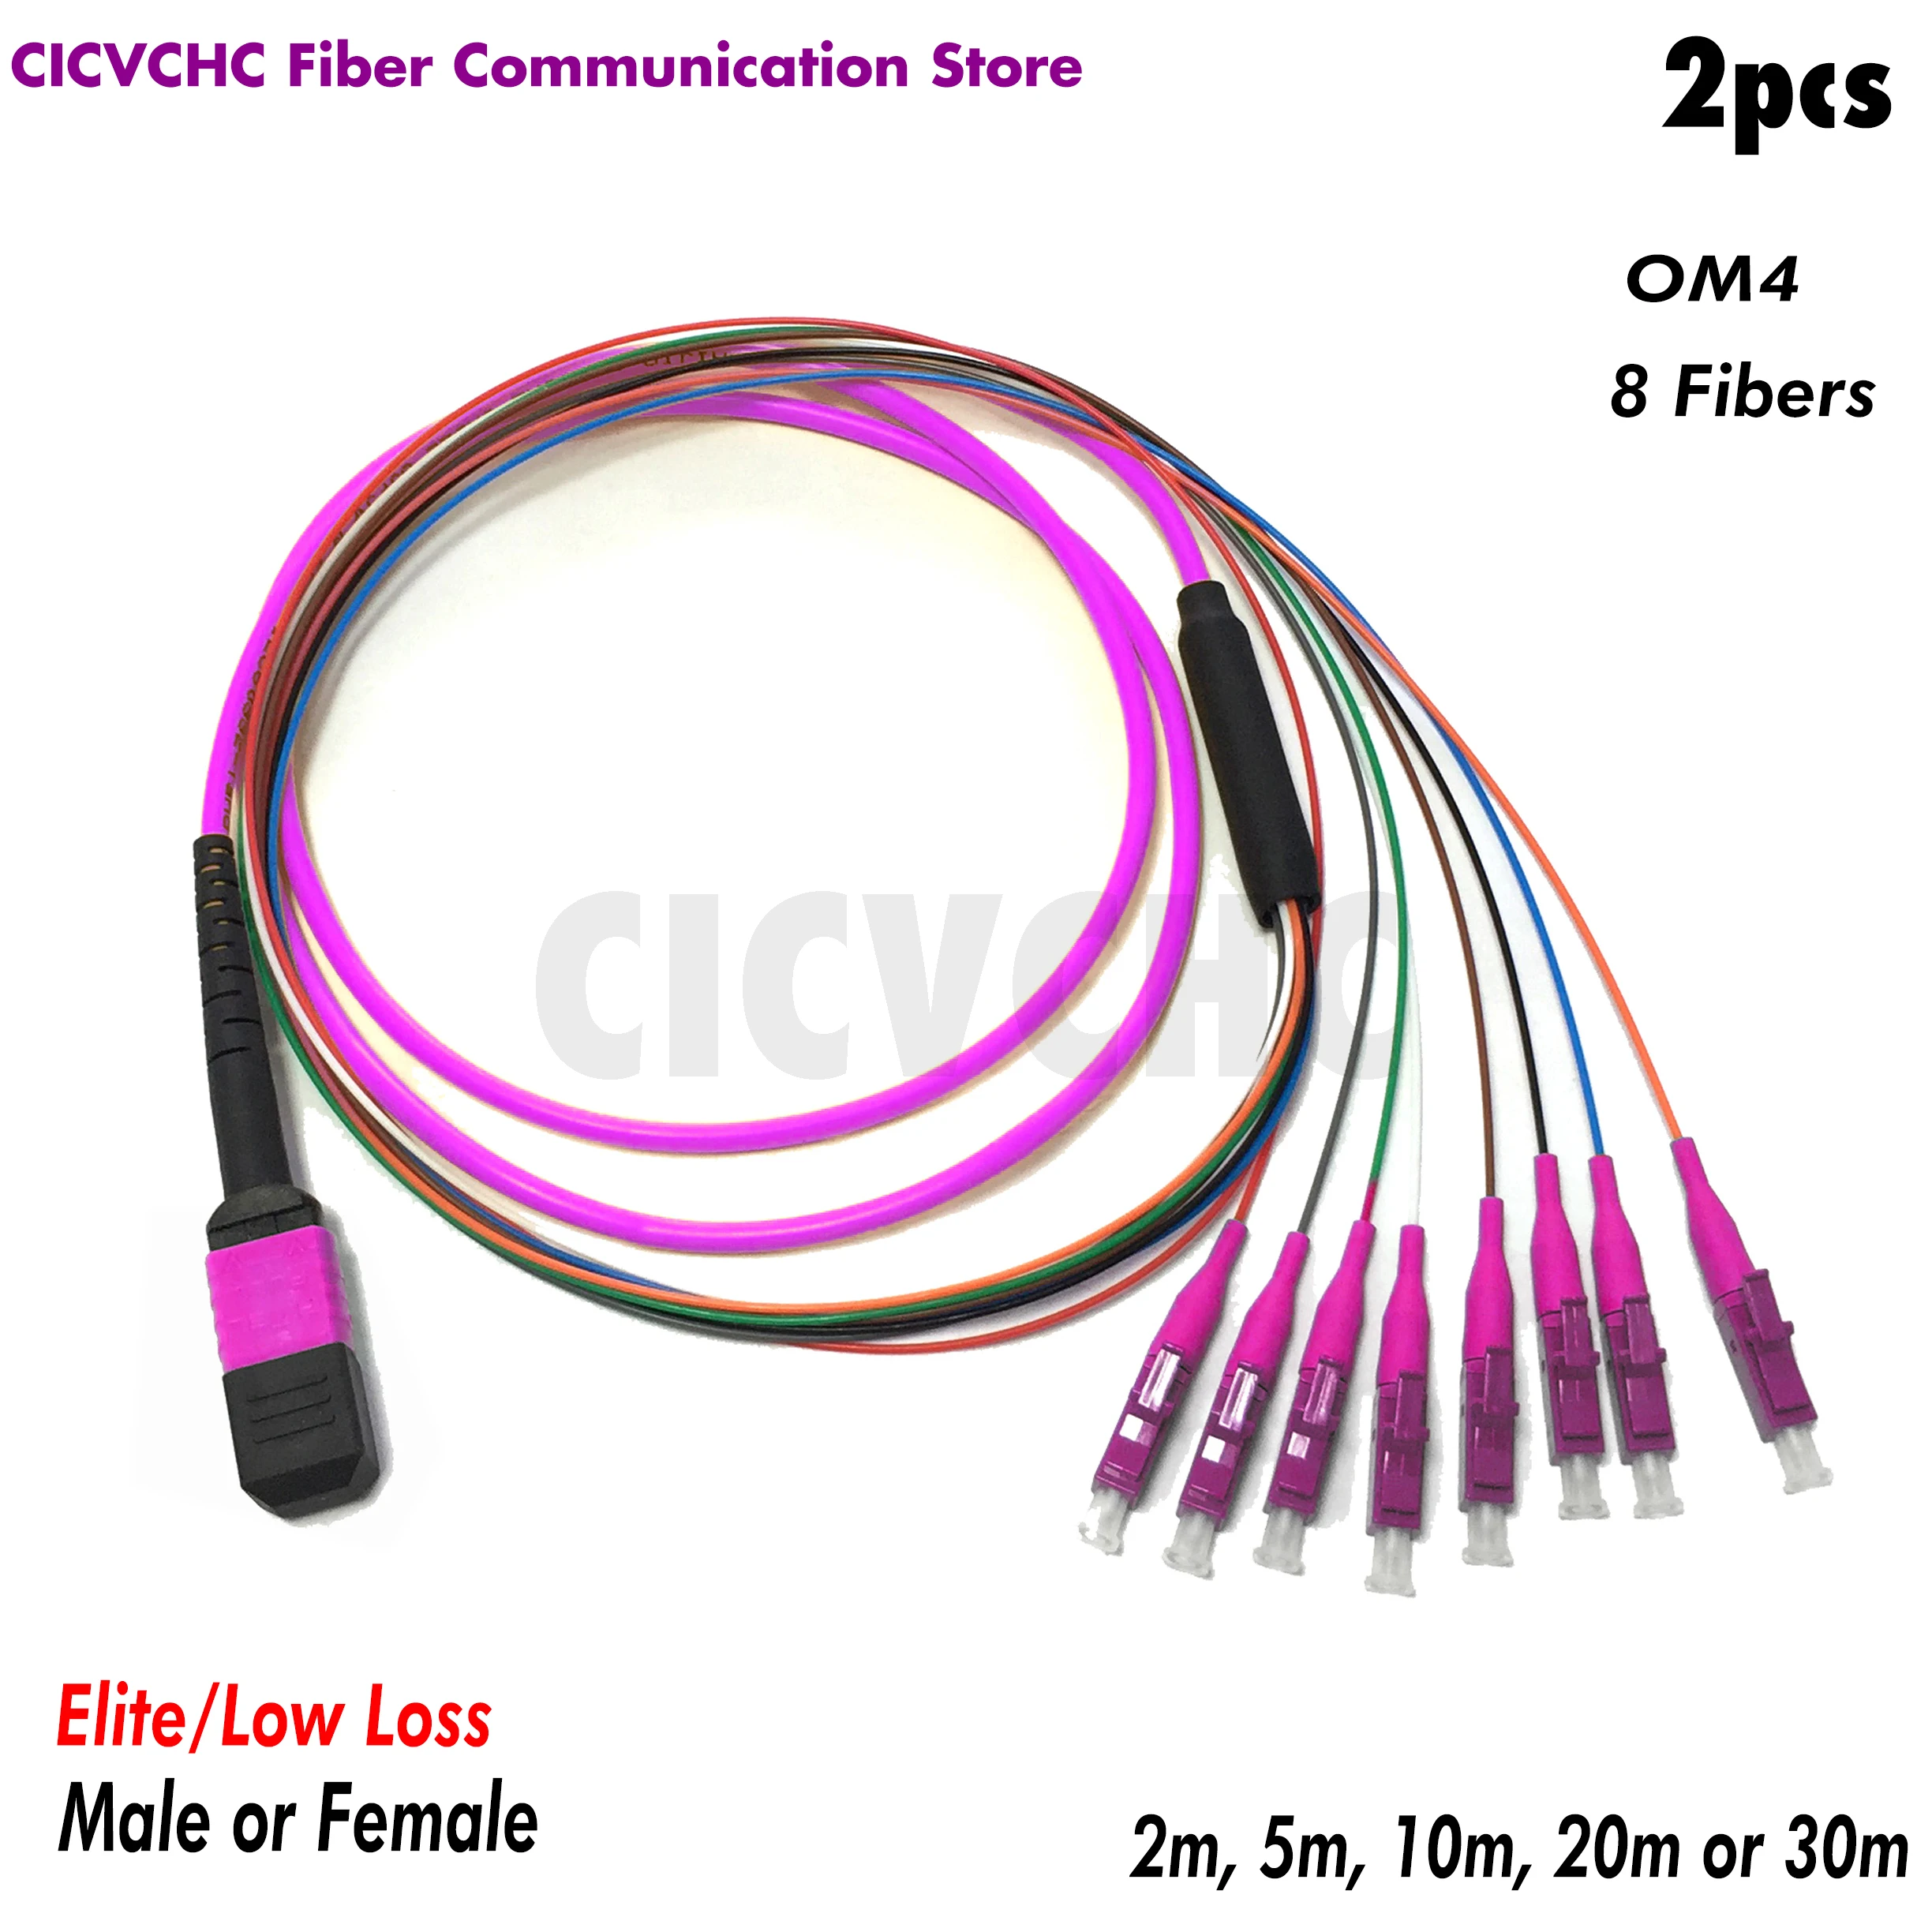 2pcs 8 fibers-MPO/UPC Fanout LC/UPC -OM4-Elite/Low loss-Male/Female with 0.9mm-2m to 30m/MPO Assembly superbat fakra k coding hsd cable assembly straight female to straight male dacar 535 4pole car radio antenna